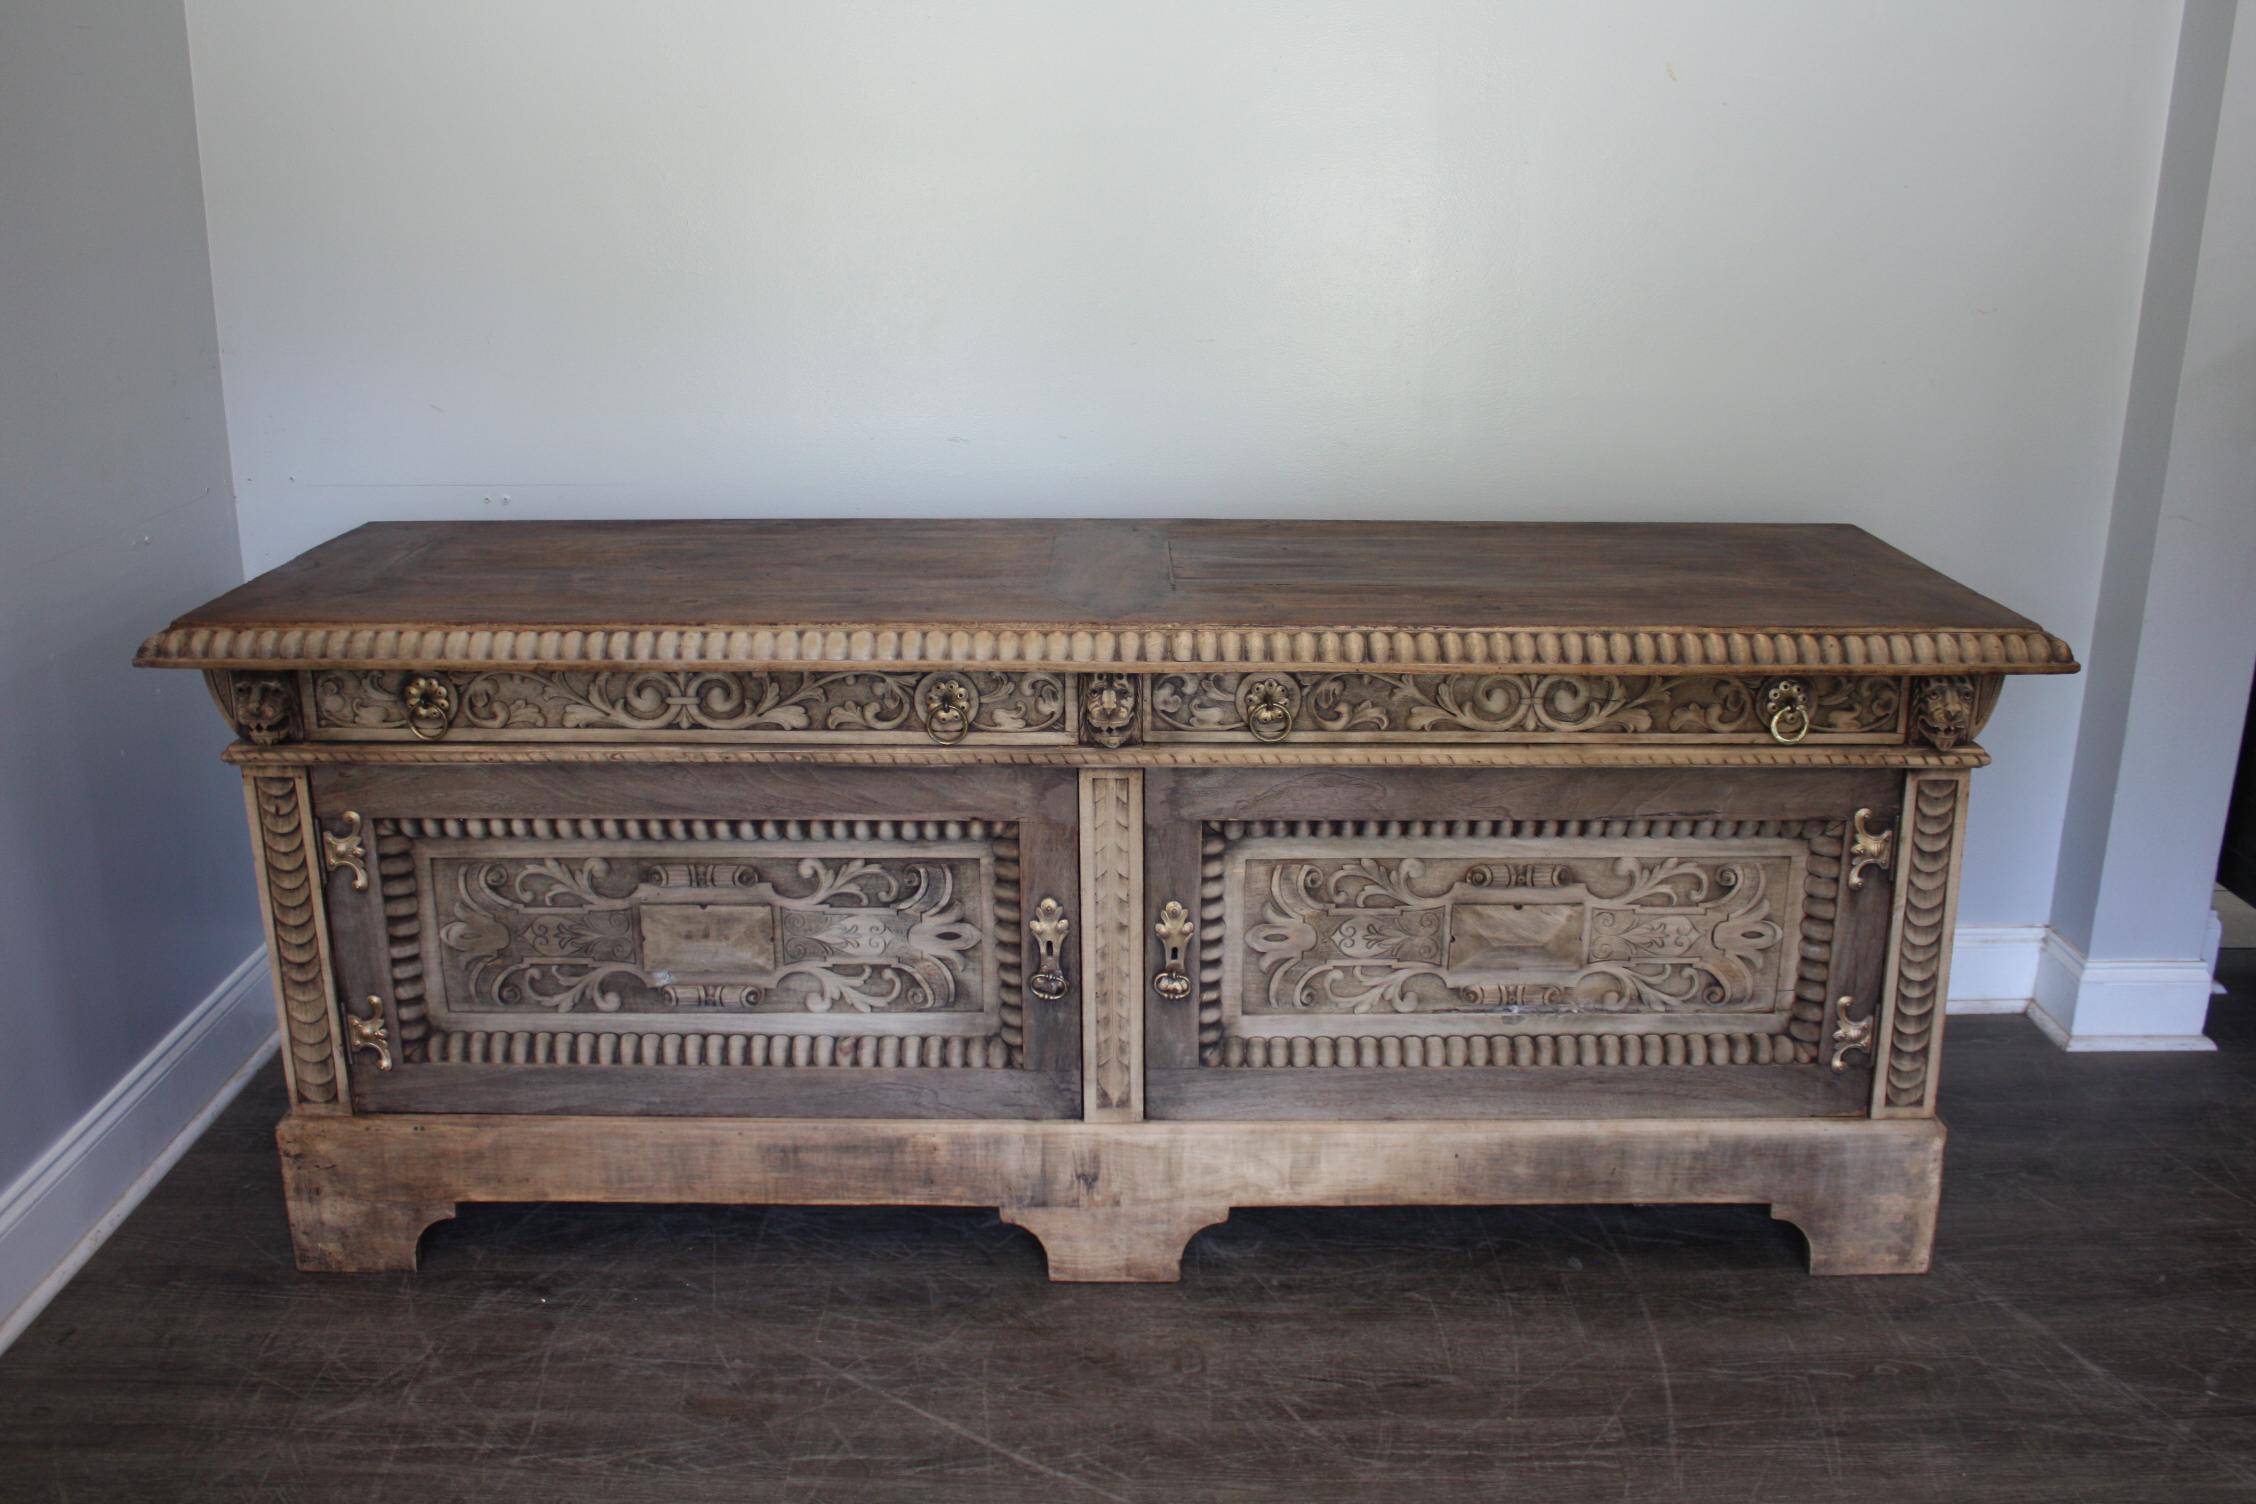 This magnificent sideboard comes from the border of Spain and France. Rich with its carvings, it is just stunning.